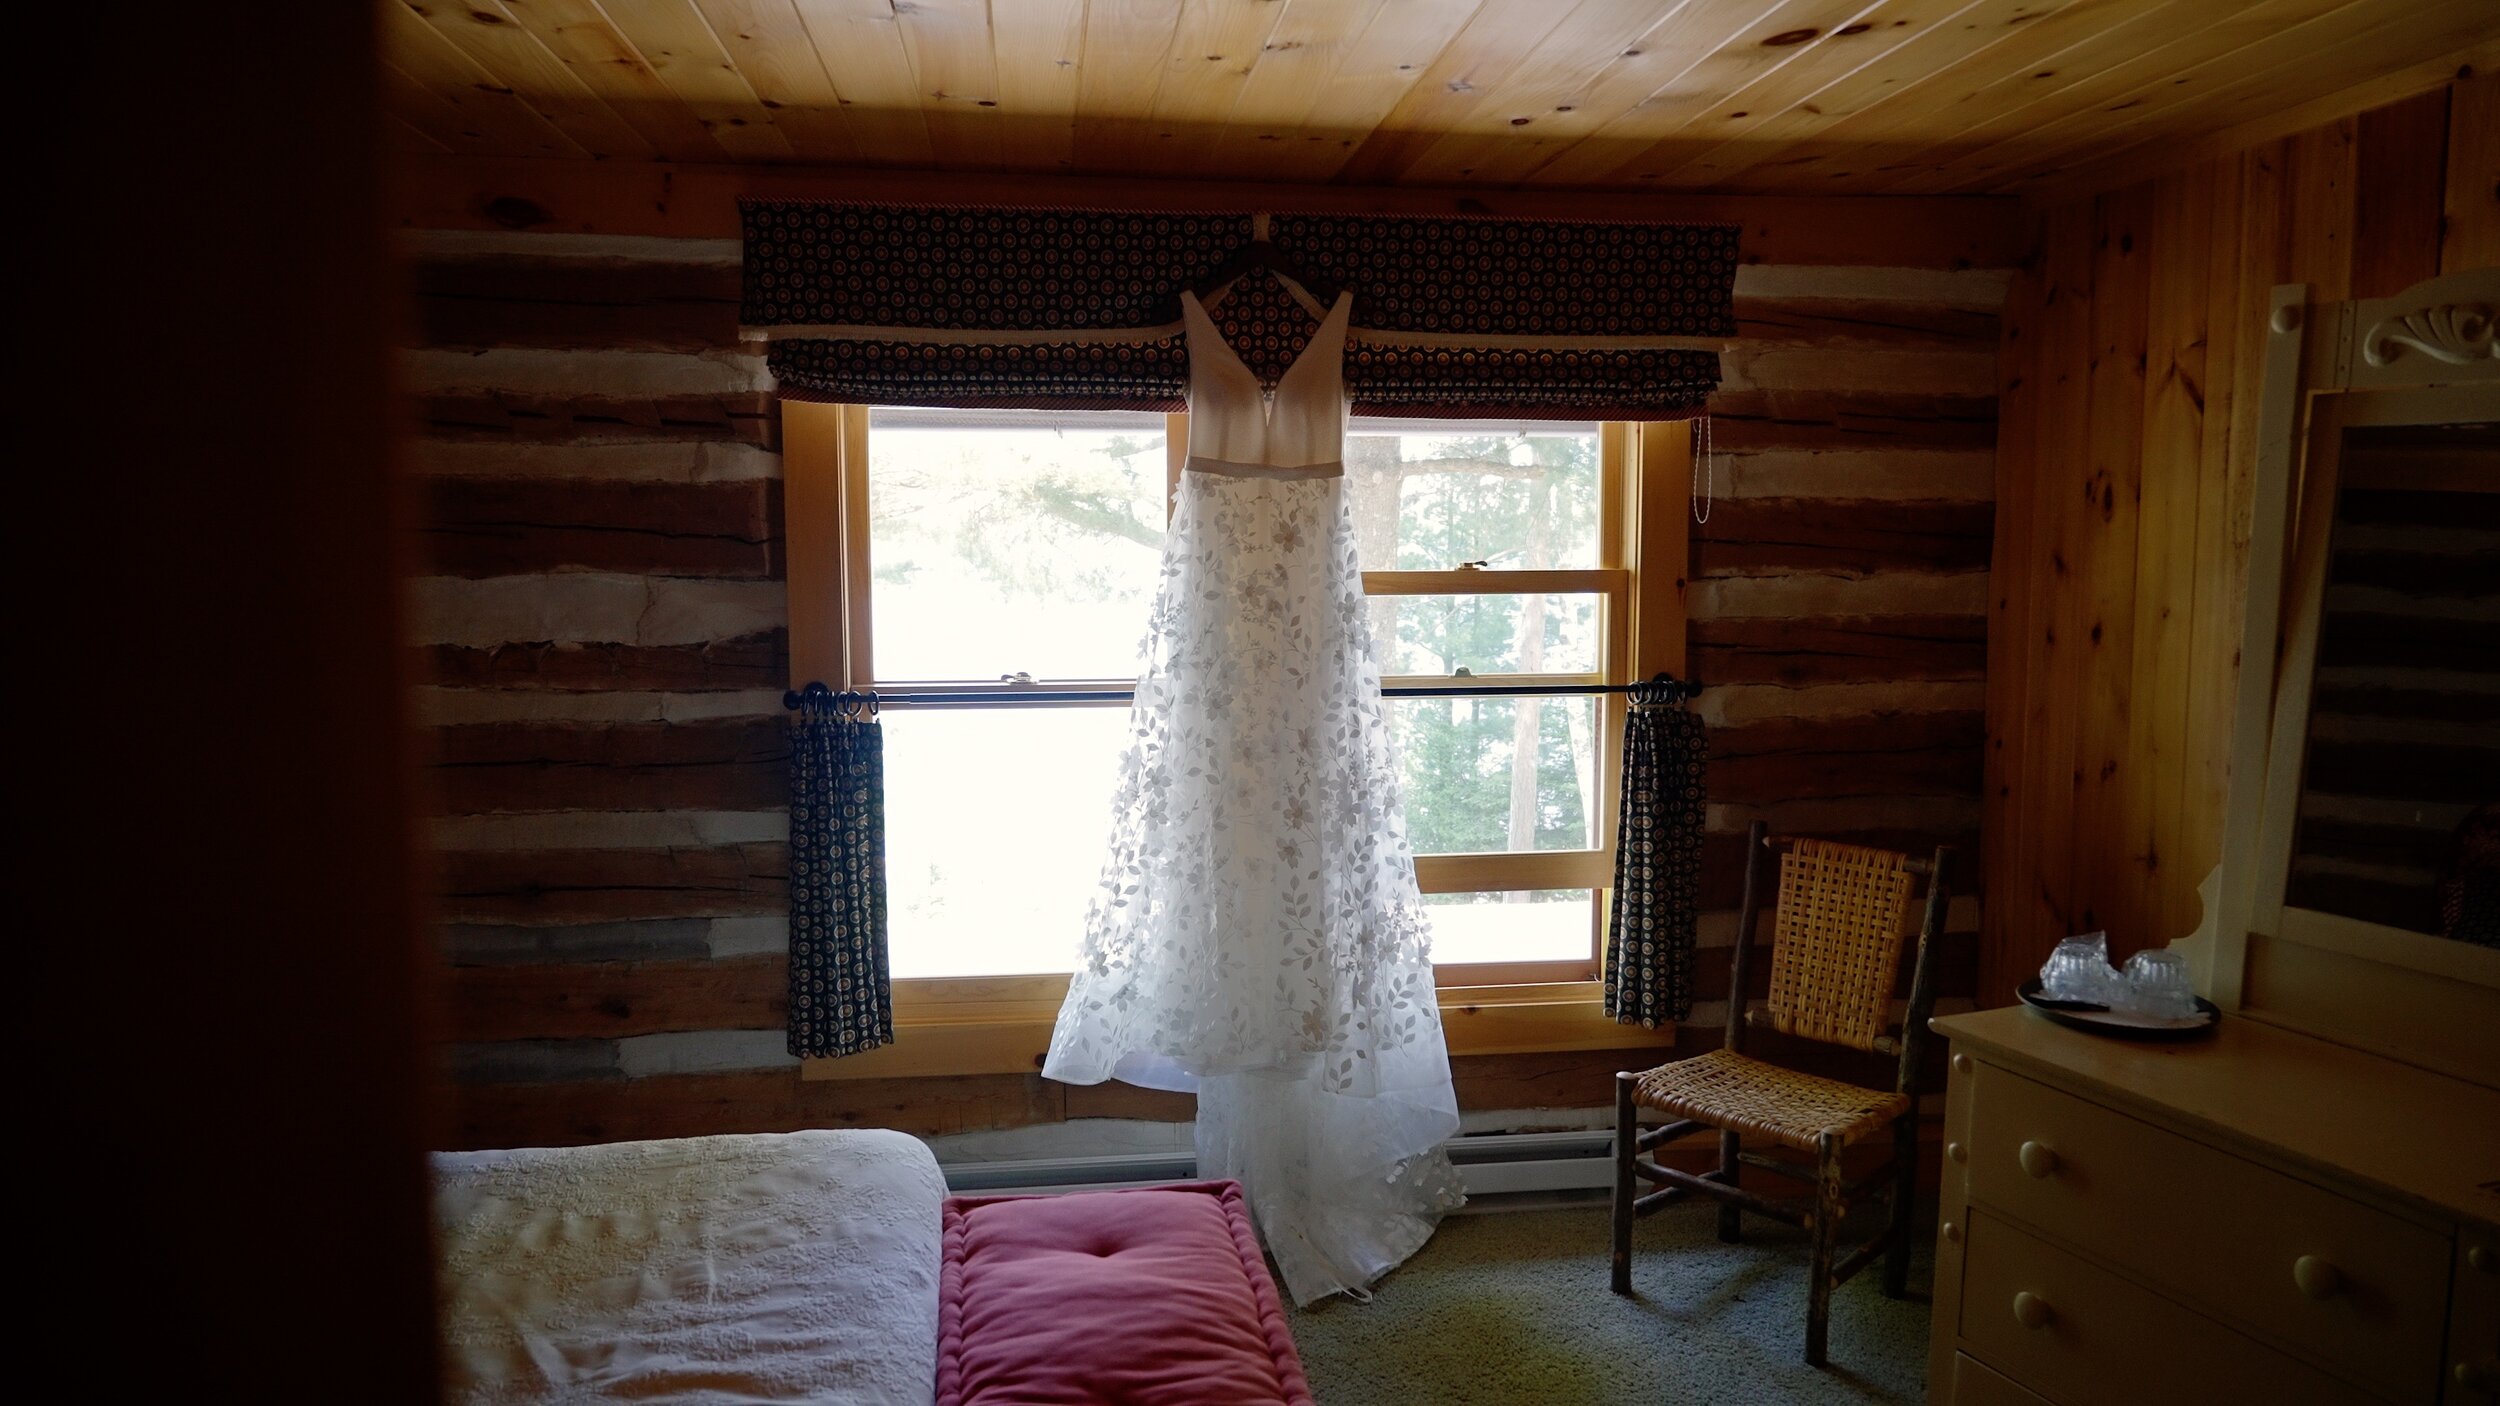 Savin London Bridal gown at coon's franklin lodge in Northern Wisconsin